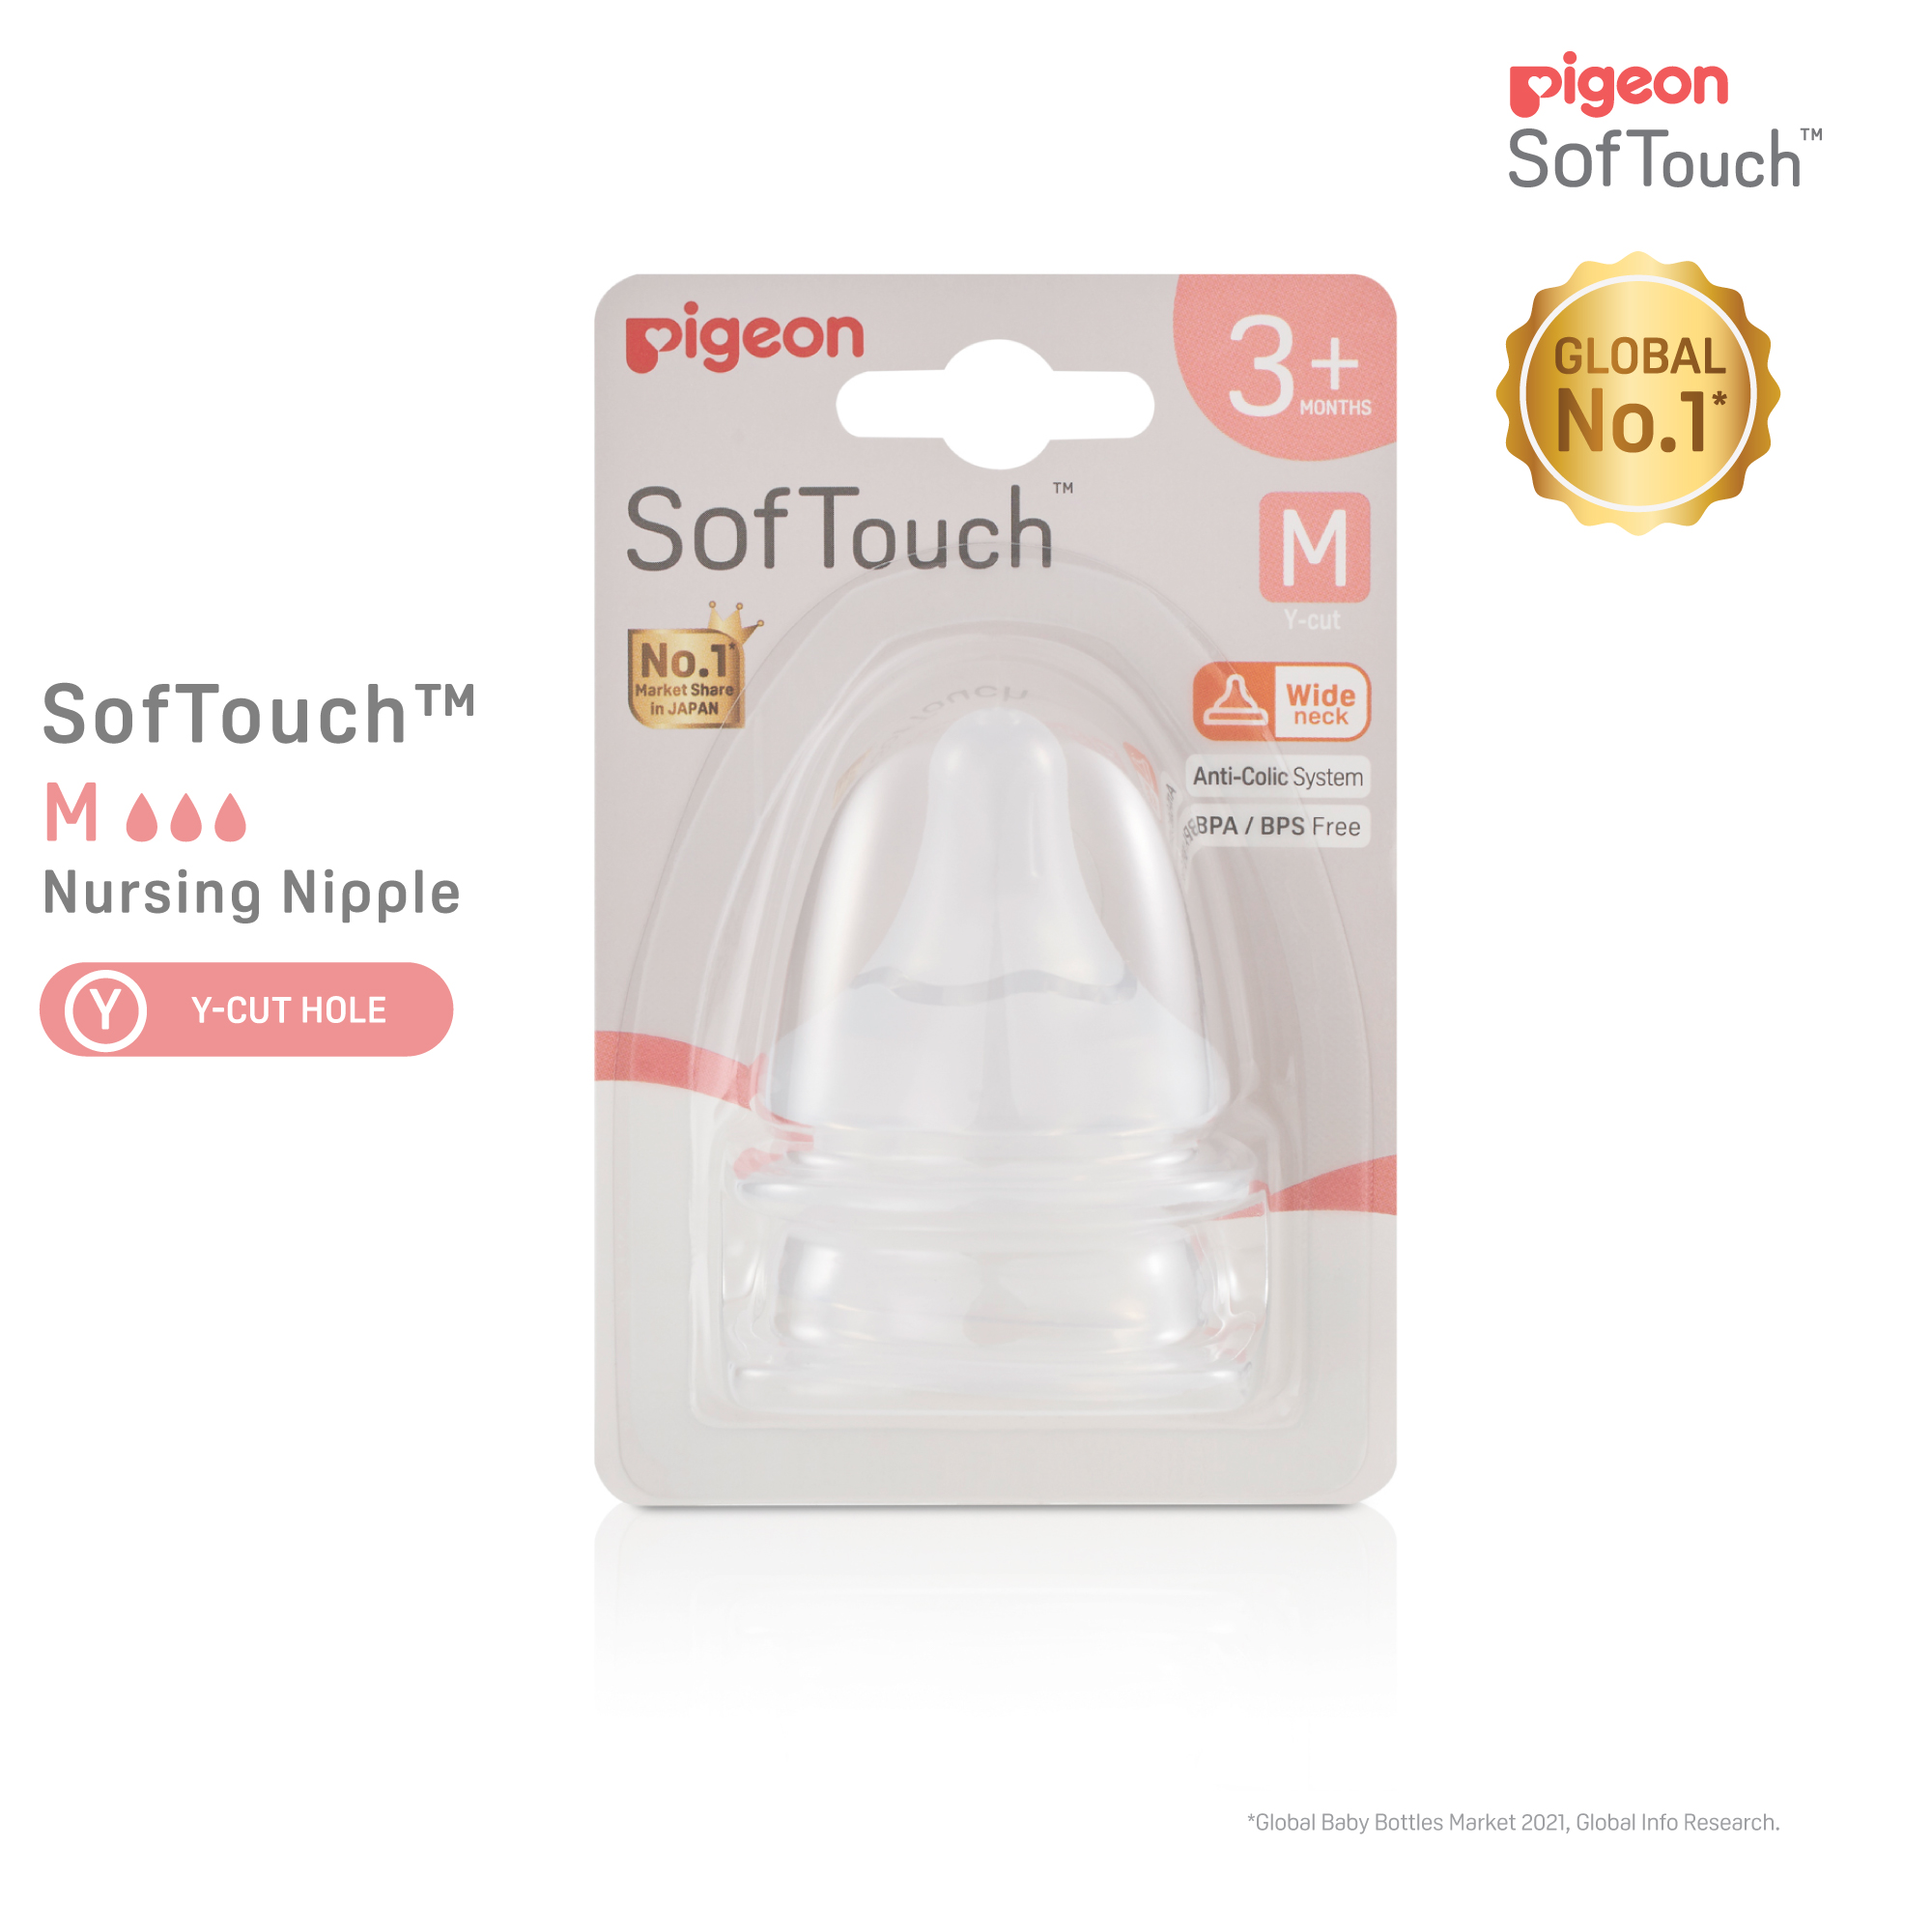 Pigeon SofTouch 3 Nipple Blister Pack 2pcs (M) (PG-79463)